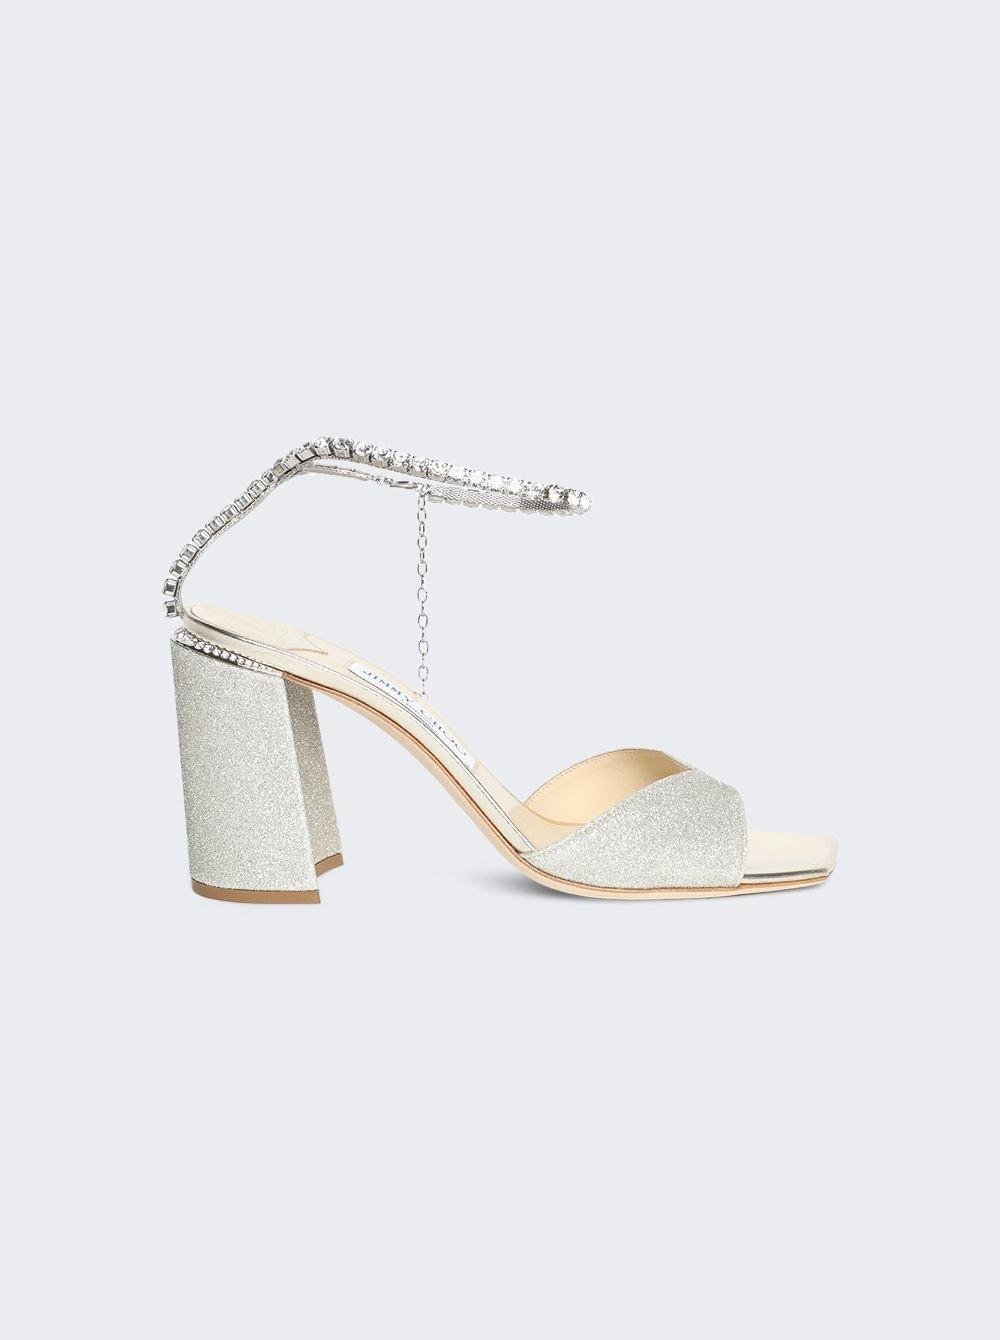 Saeda 85 Sandal Platinum Ice And Crystal  | The Webster by JIMMY CHOO